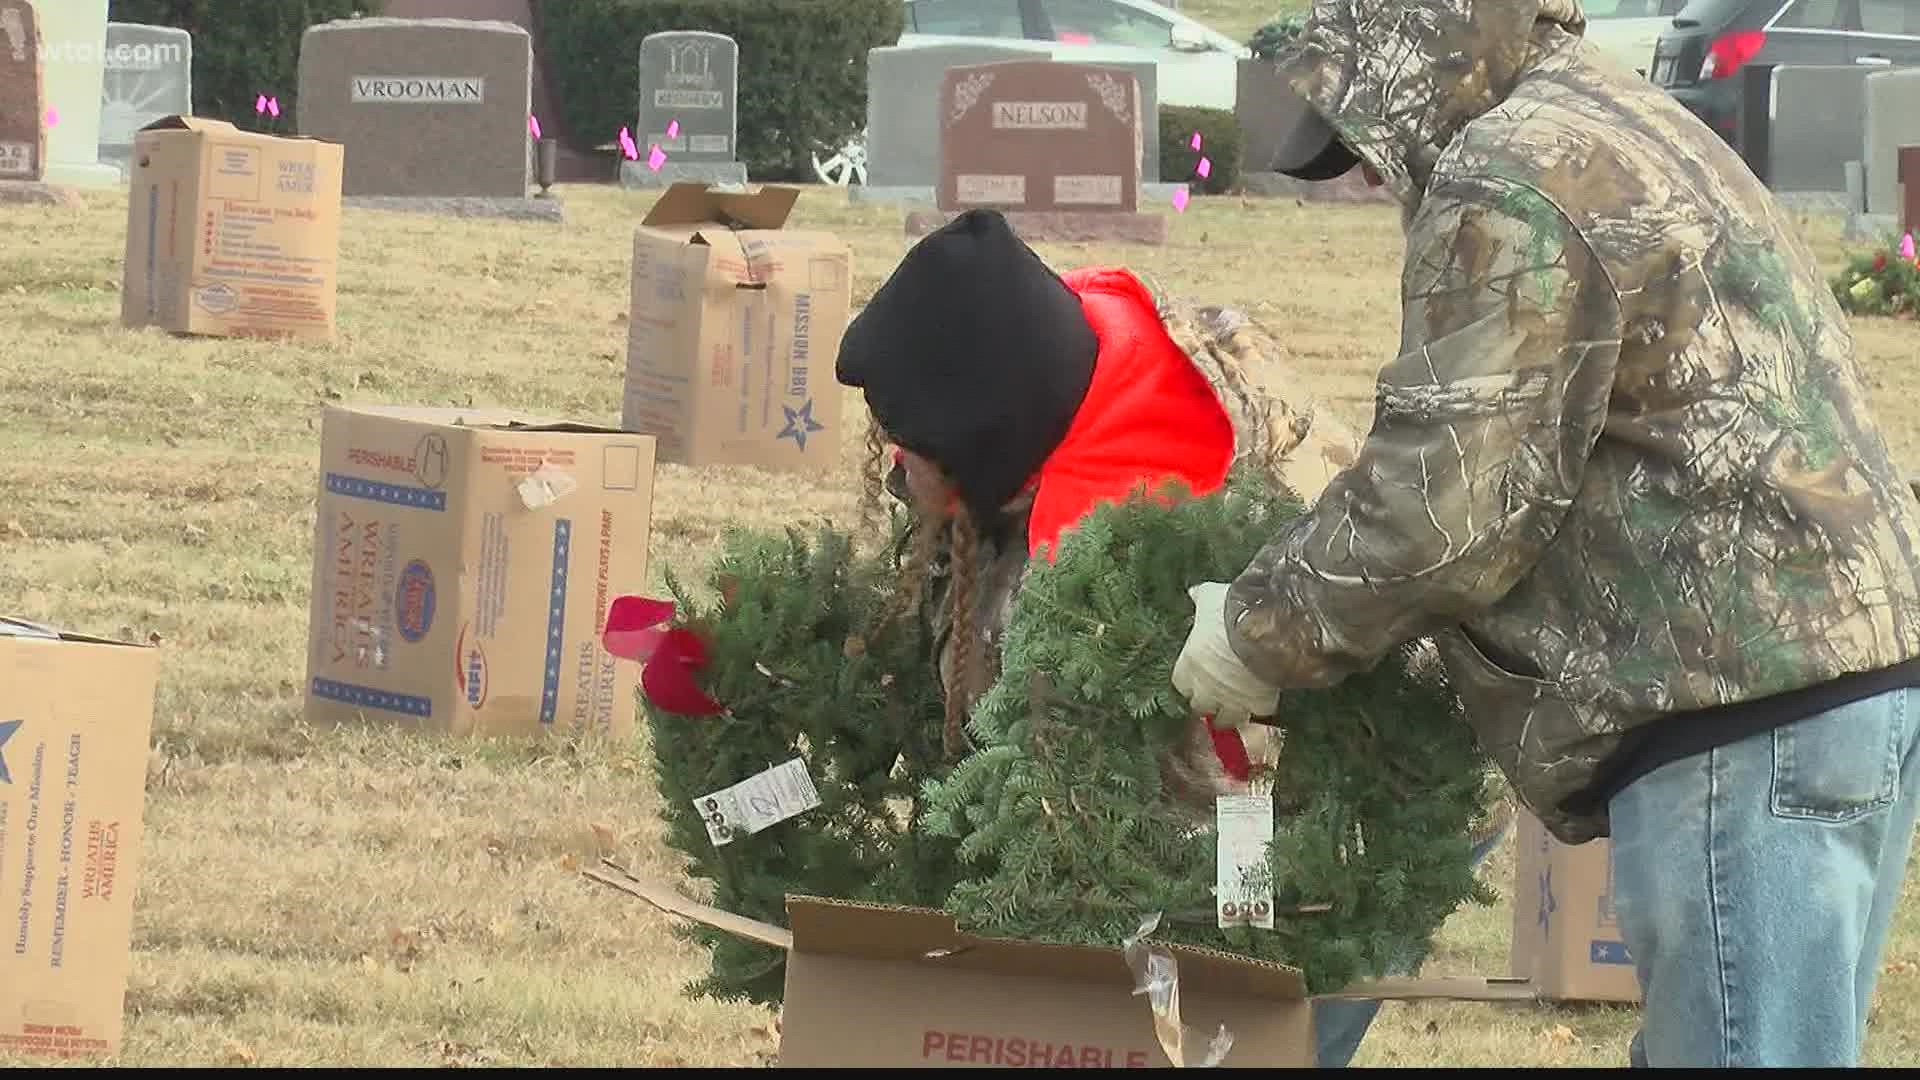 2 million graves will receive a wreath this year.